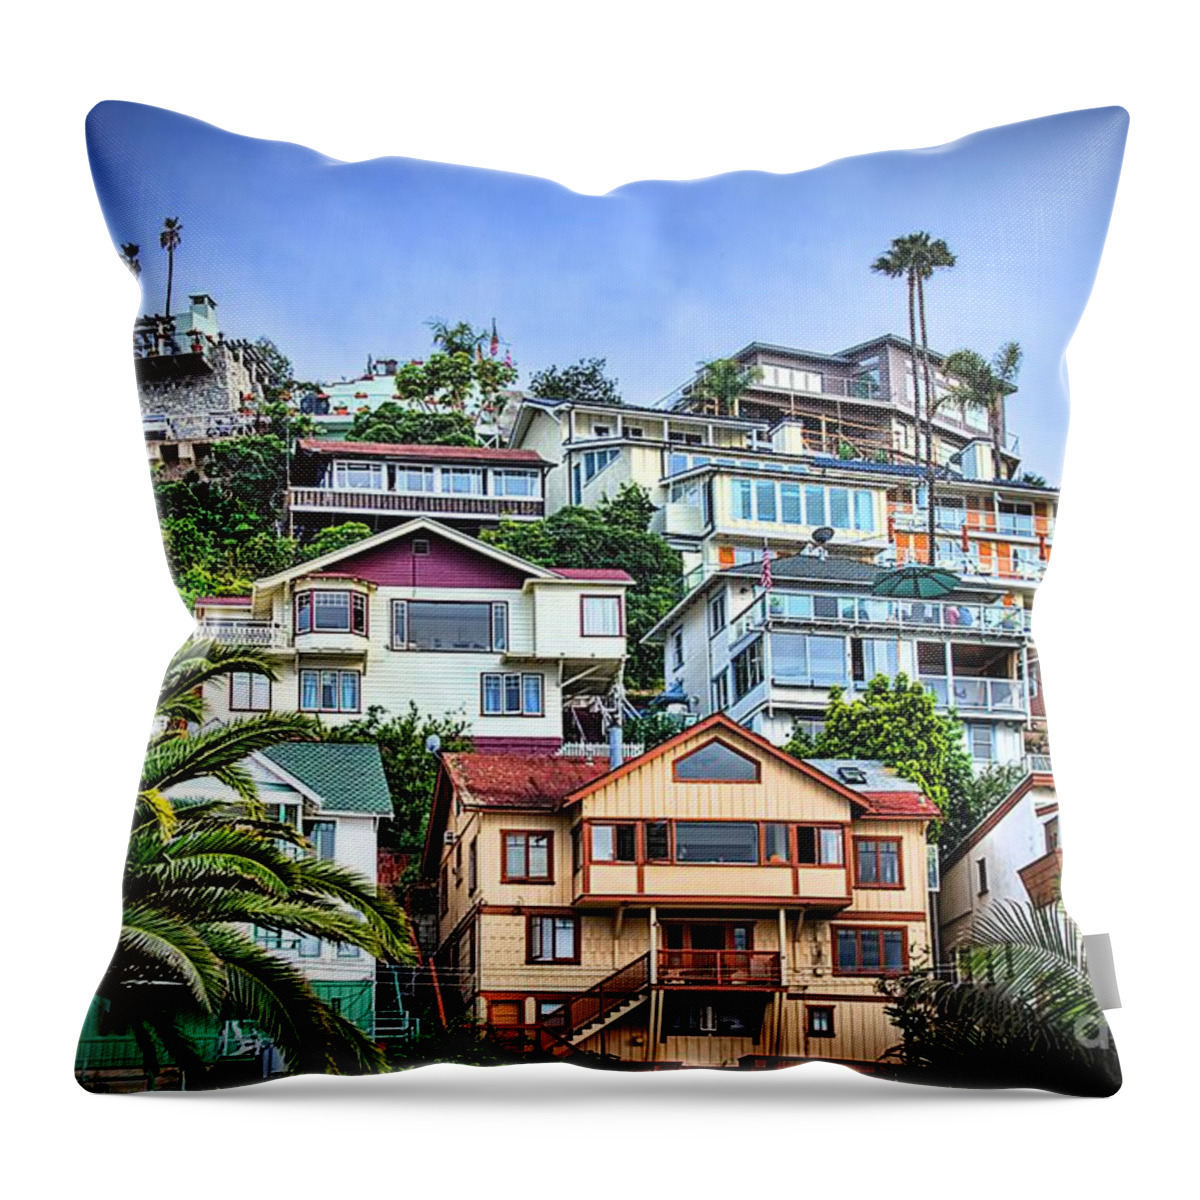  Sunny Throw Pillow featuring the photograph Avalon Hillside with Harbor View by Norma Warden